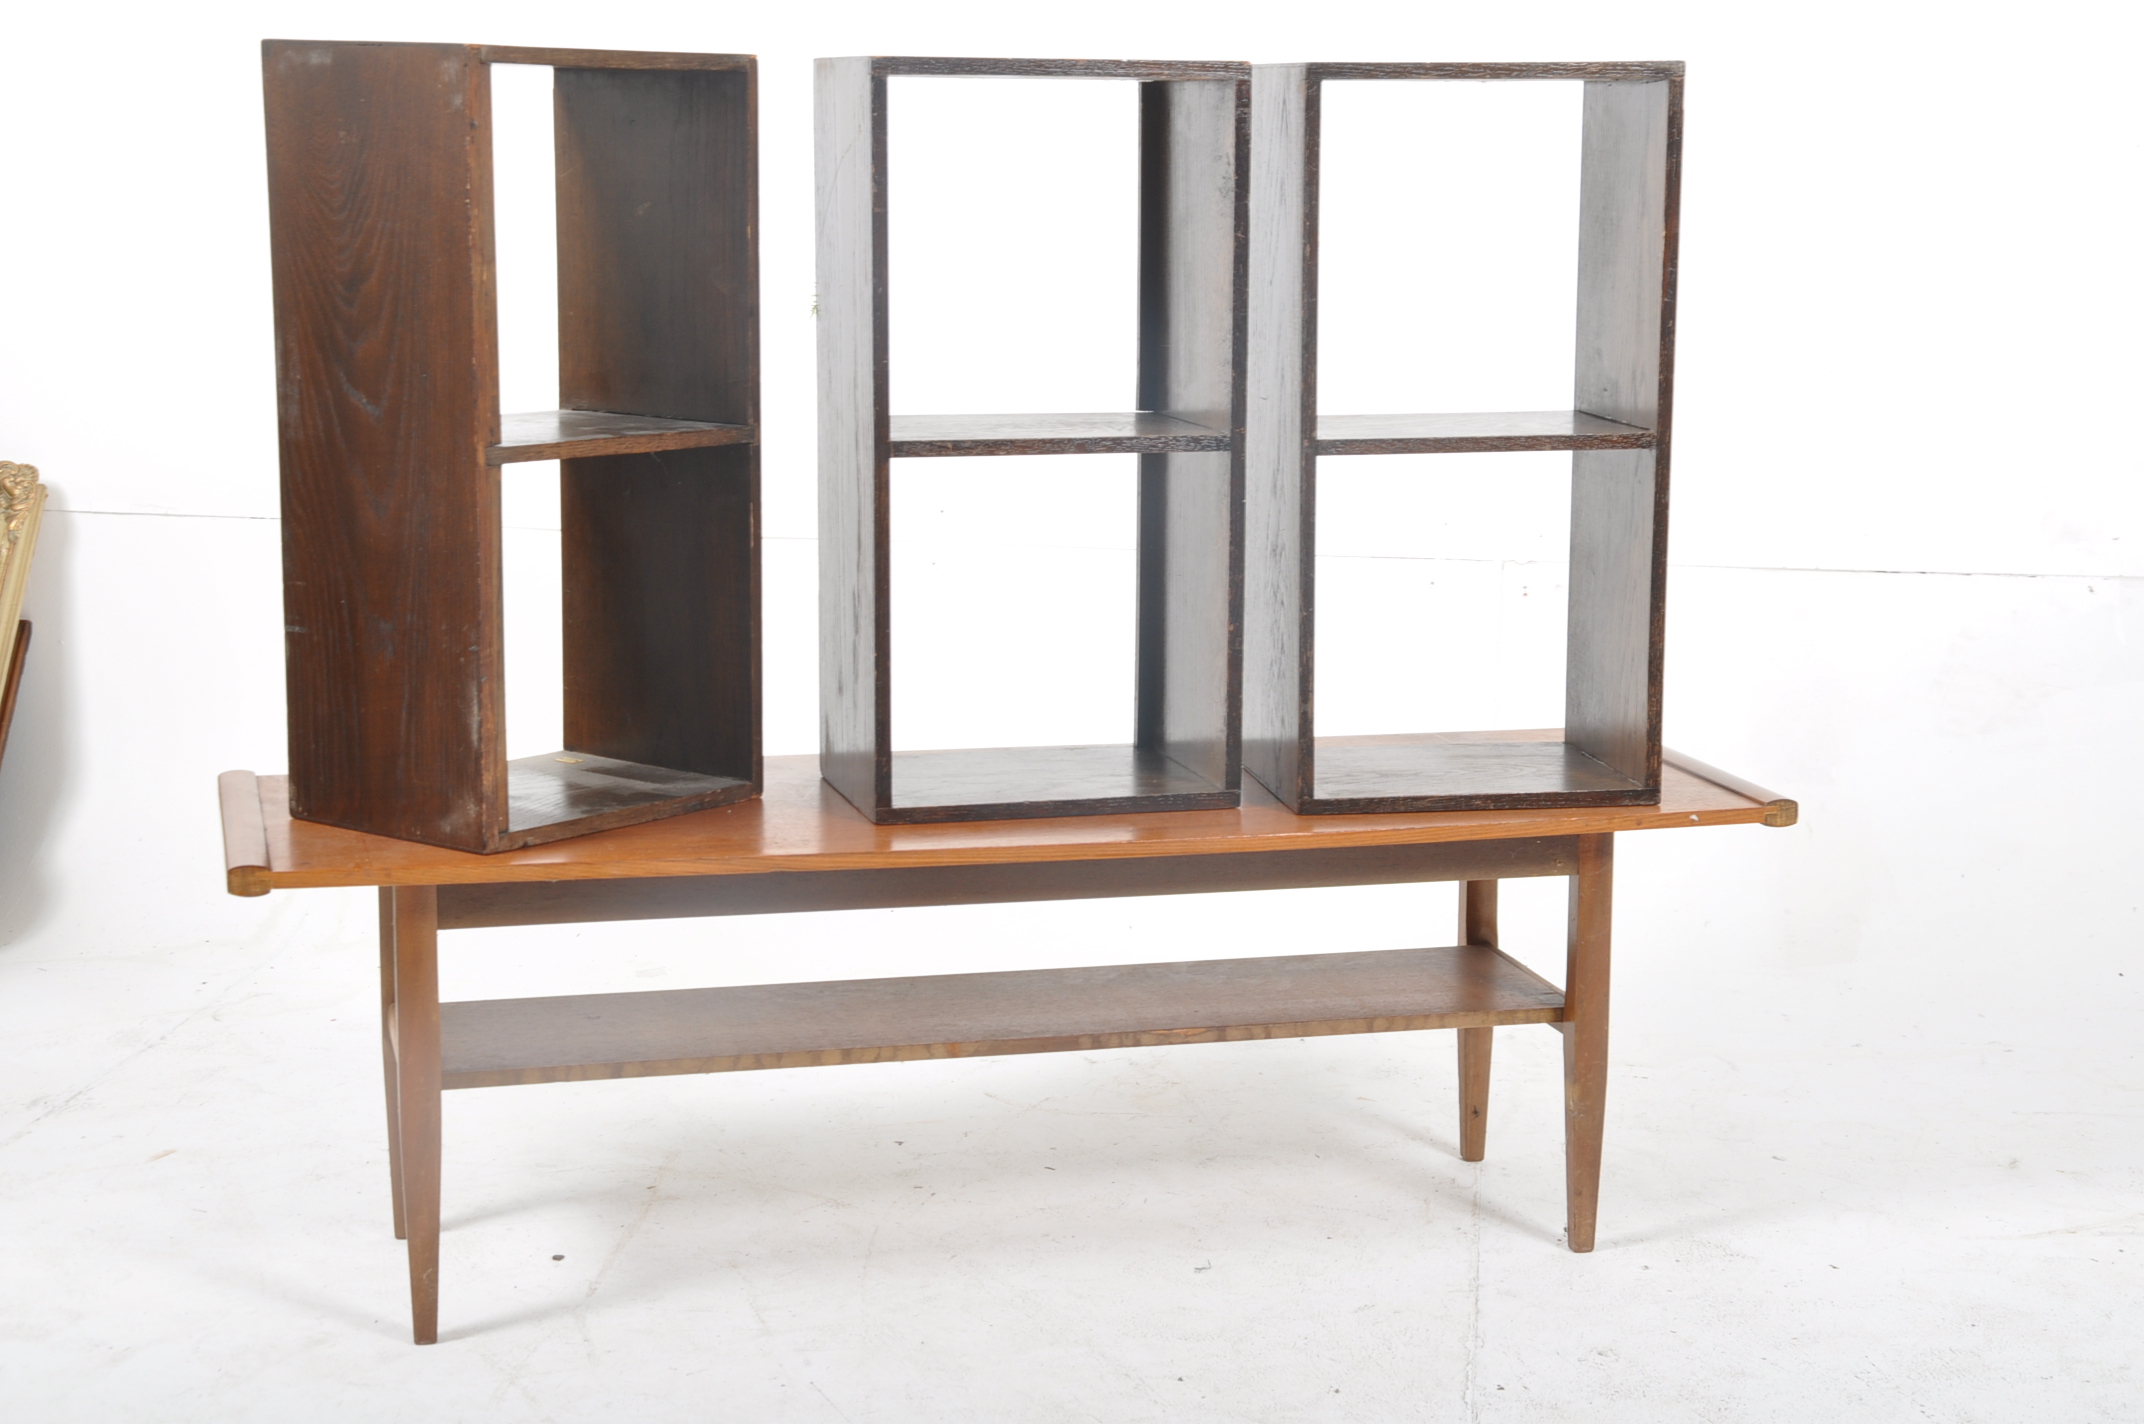 A retro oak coffee table together with a set of 3 Unix stacking modular bookcase shelves